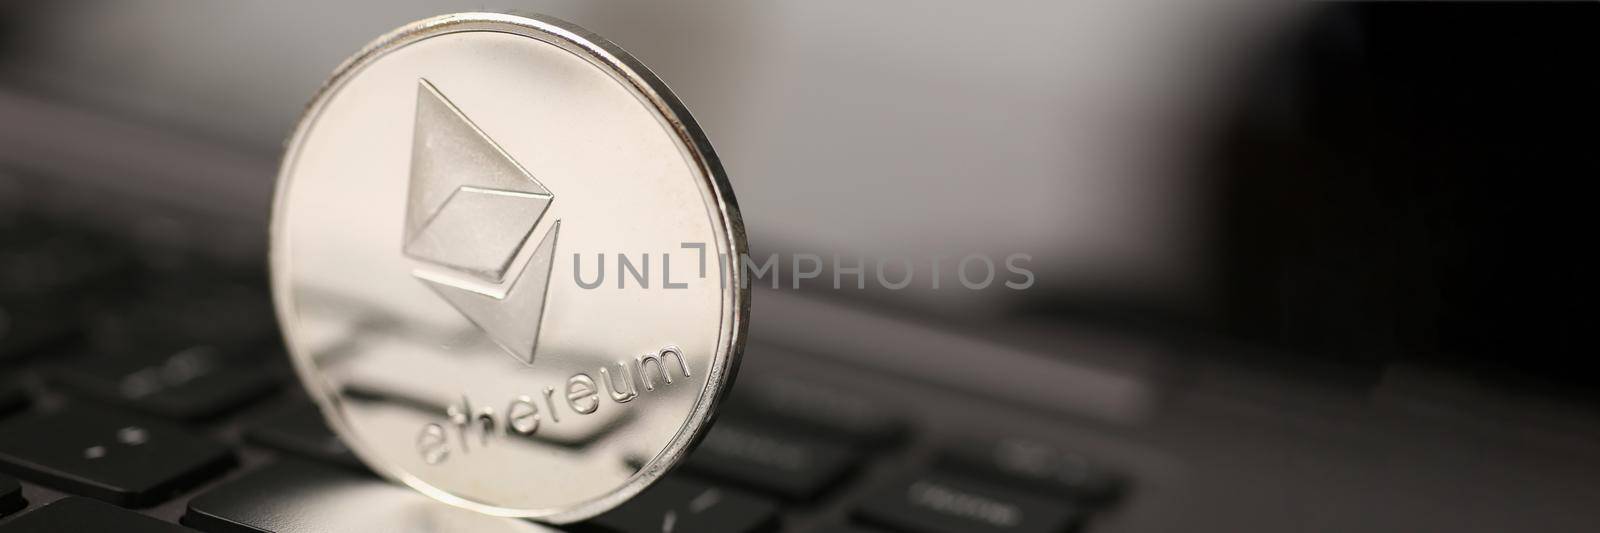 Ethereum silver coin on laptop pc keyboard by kuprevich